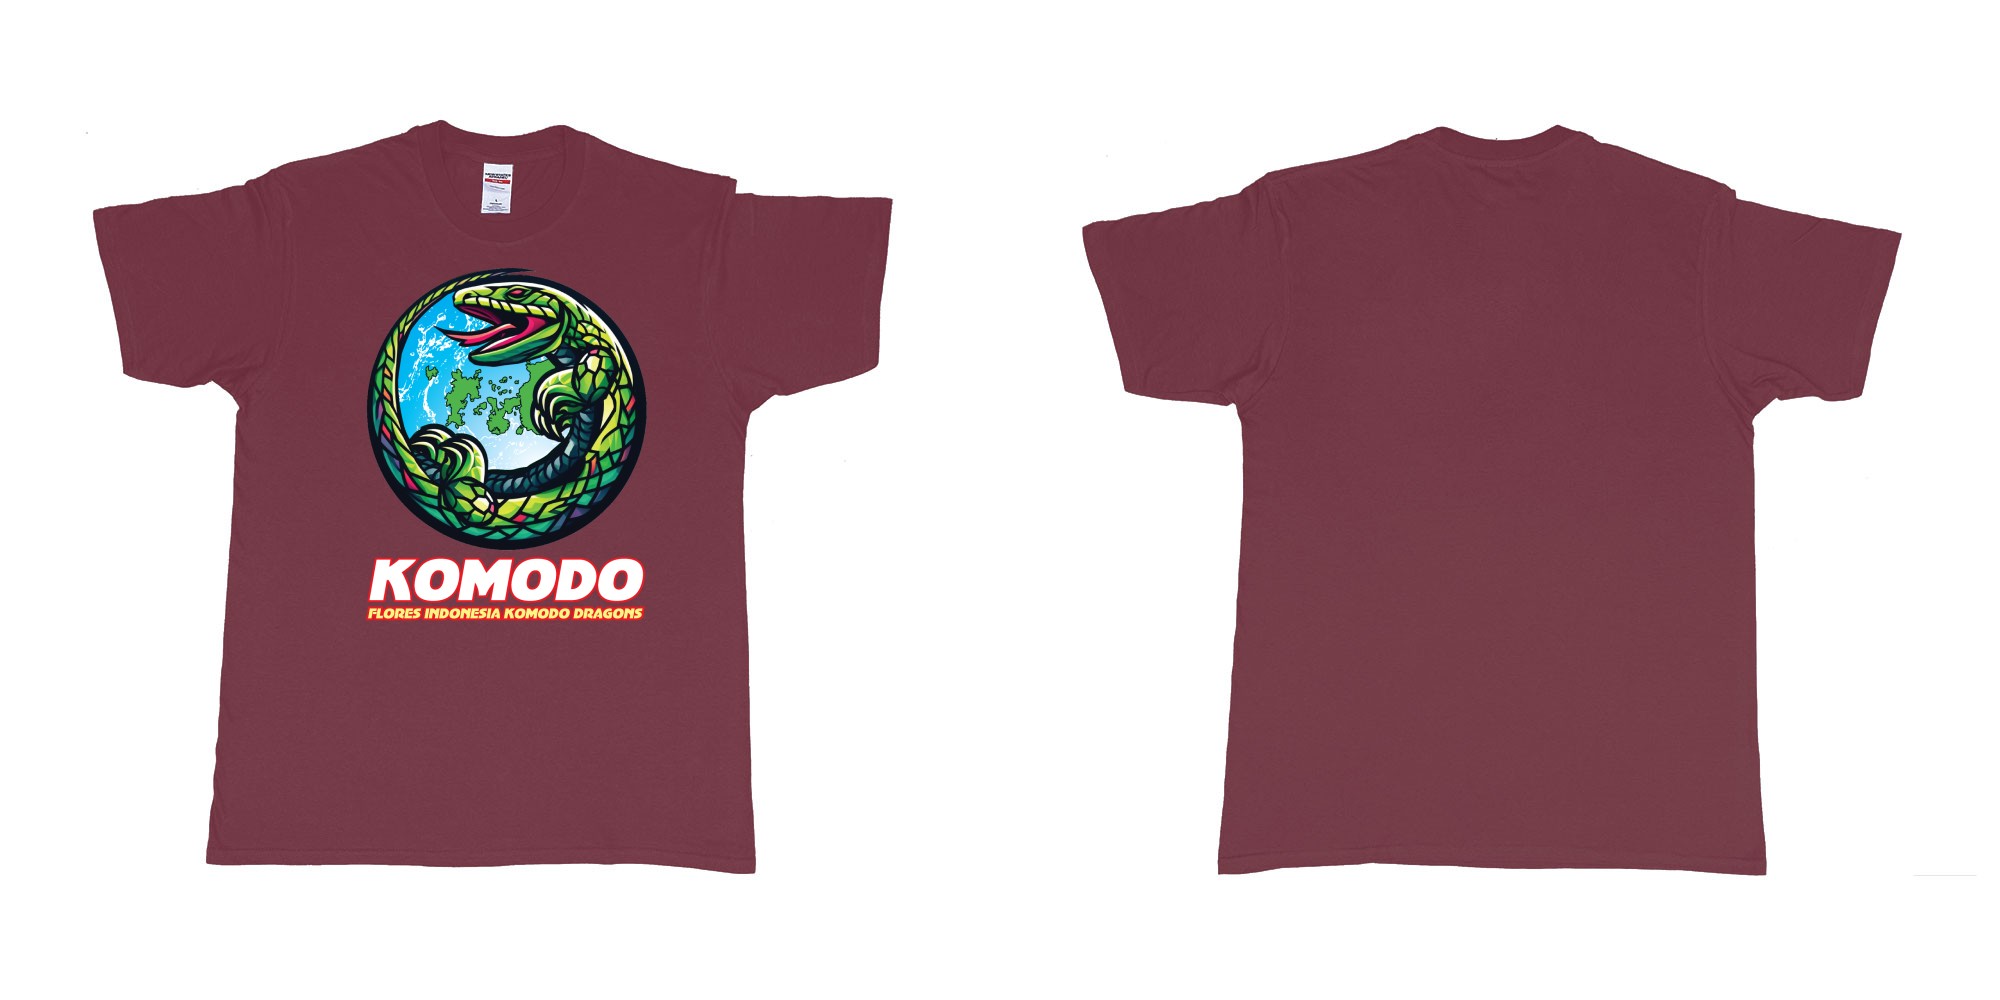 Custom tshirt design flores indonesia komodo dragons cirkle islands in fabric color marron choice your own text made in Bali by The Pirate Way